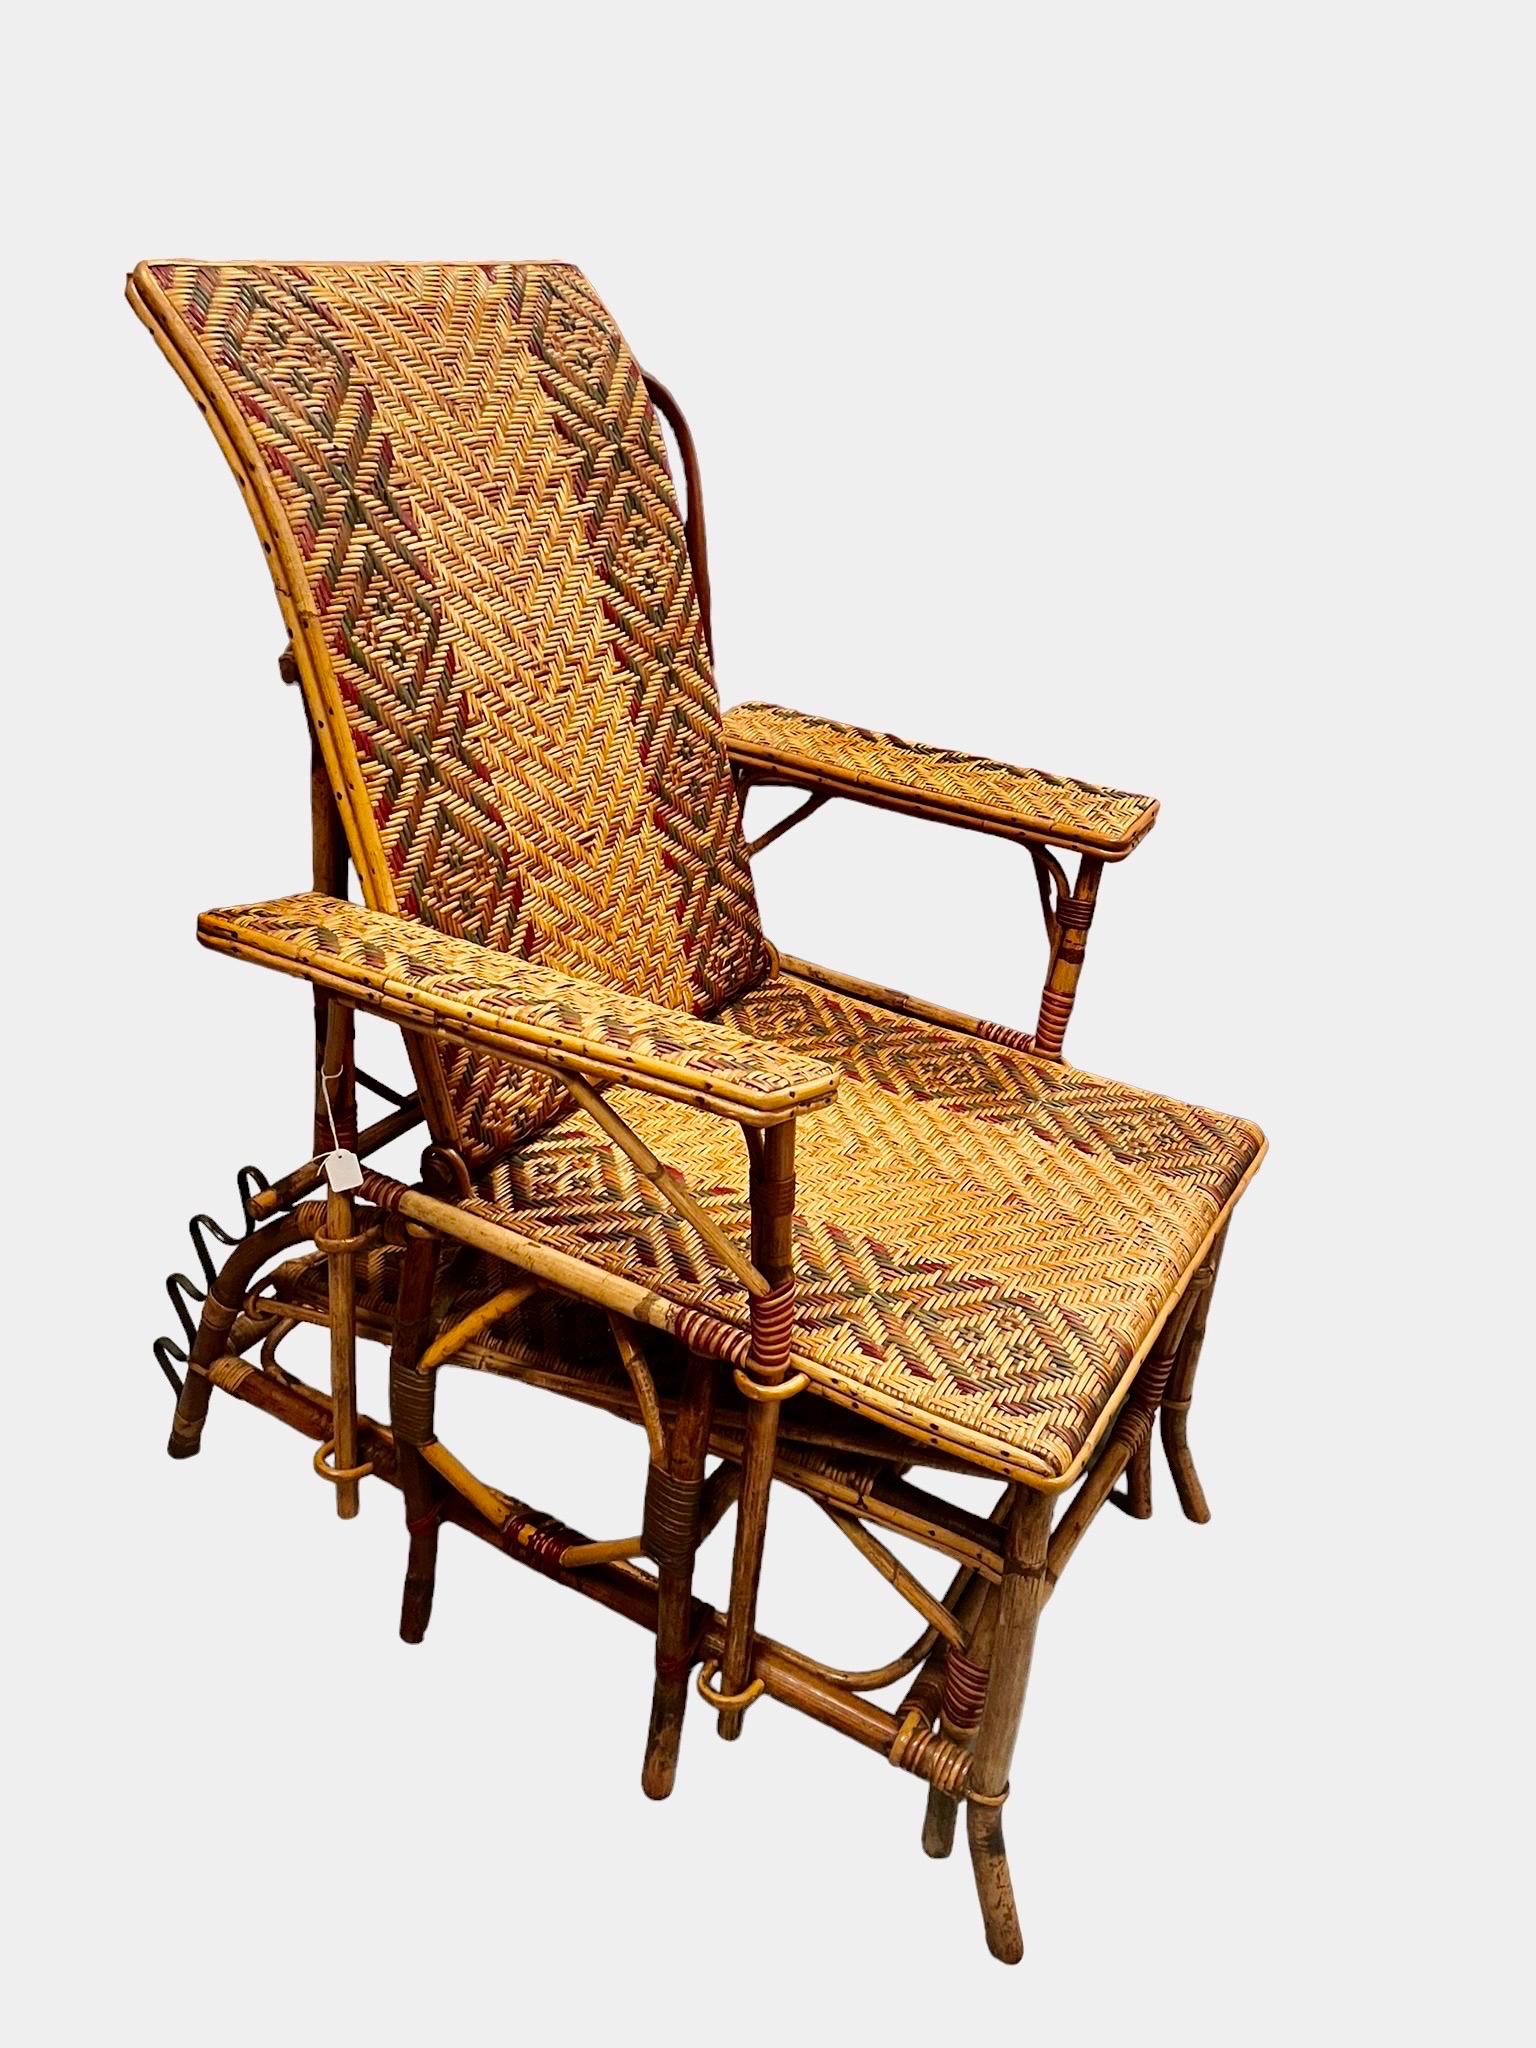 Spanish Wicker Lounge Chair with Ottoman, 1920s, Spain